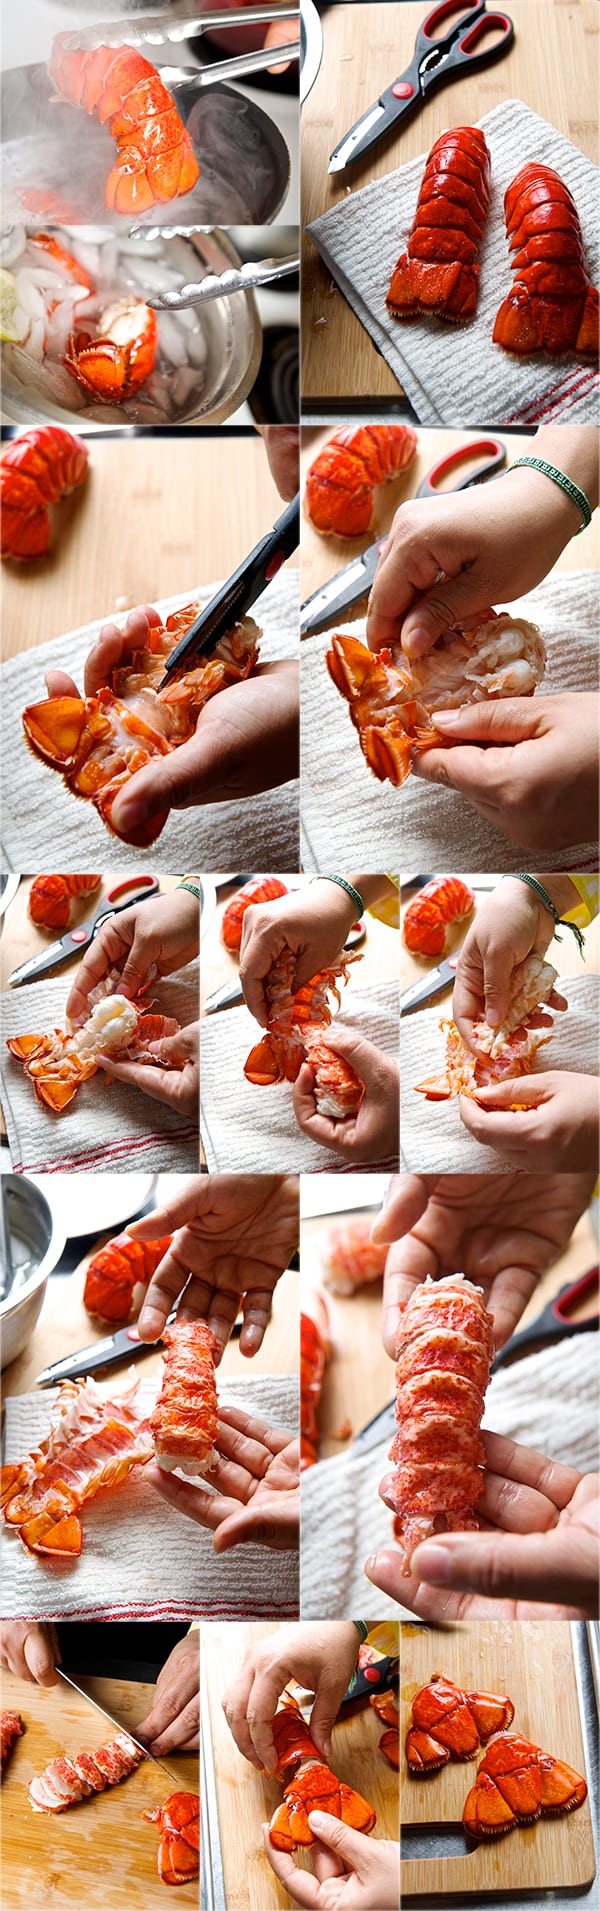 LOBSTER-secuence ~ www.yes-moreplease.com